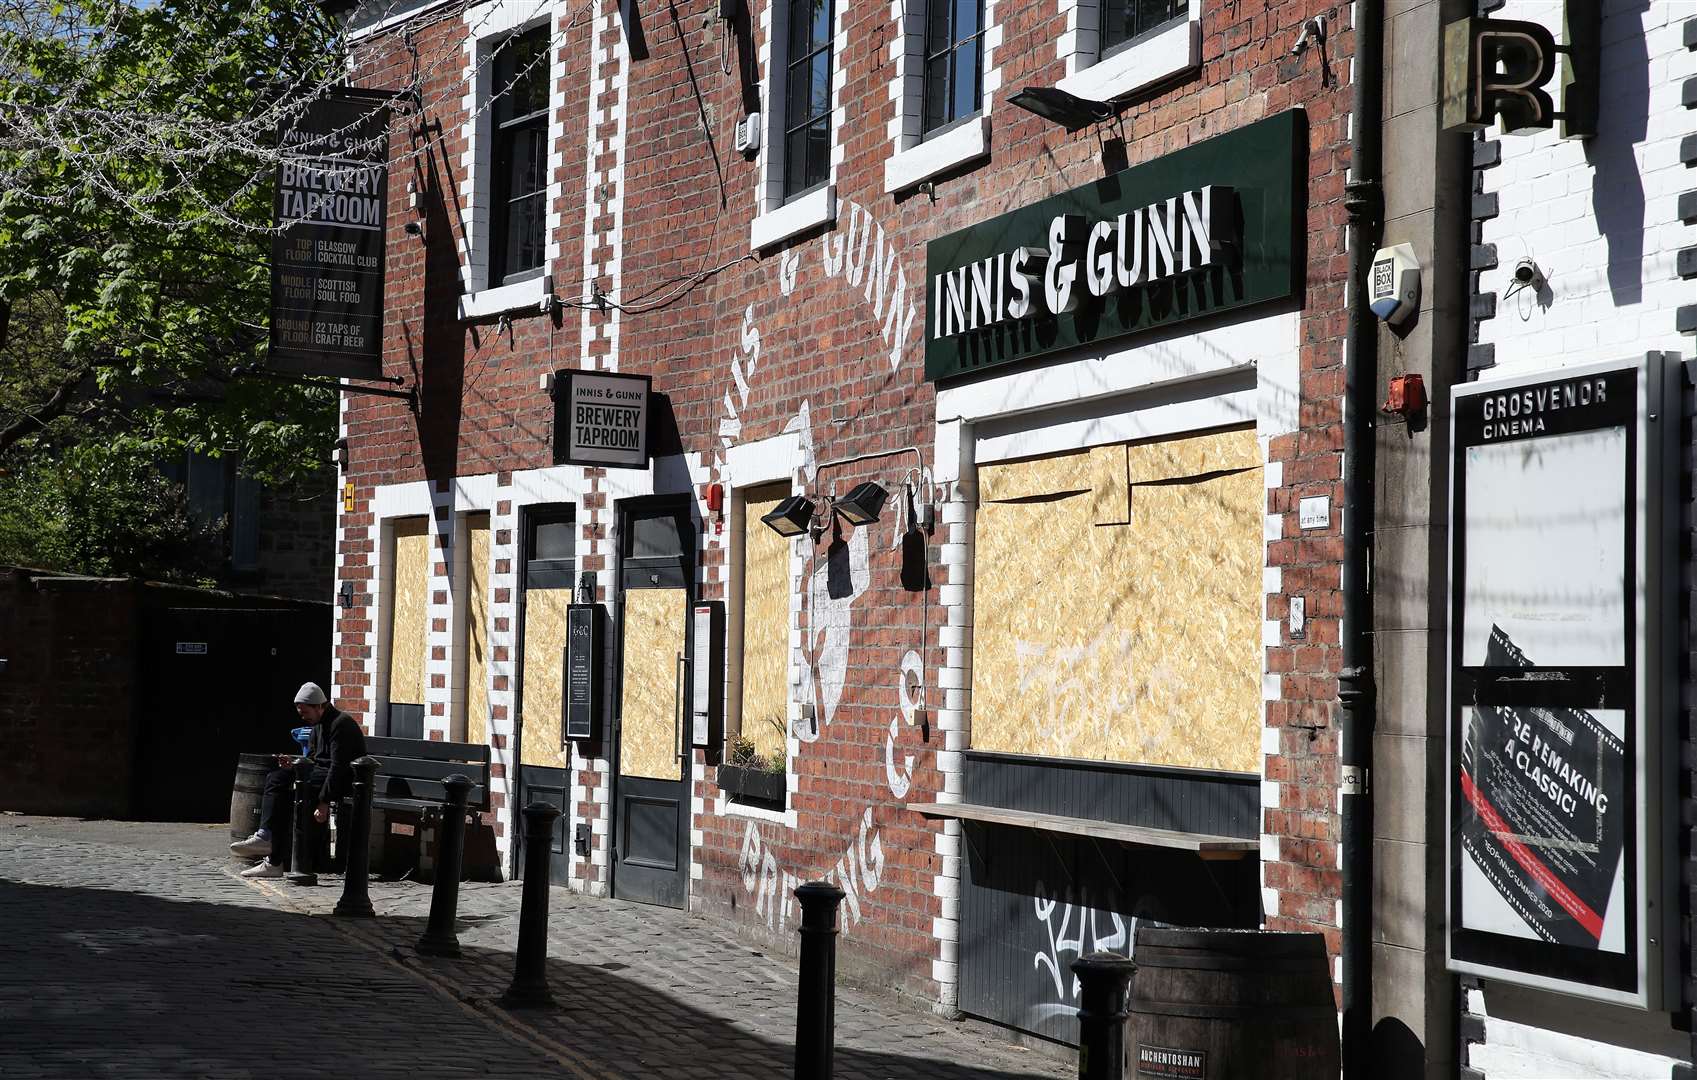 Boarded-up restaurants and pubs in Ashton Lane, Glasgow (Andrew Milligan/PA)